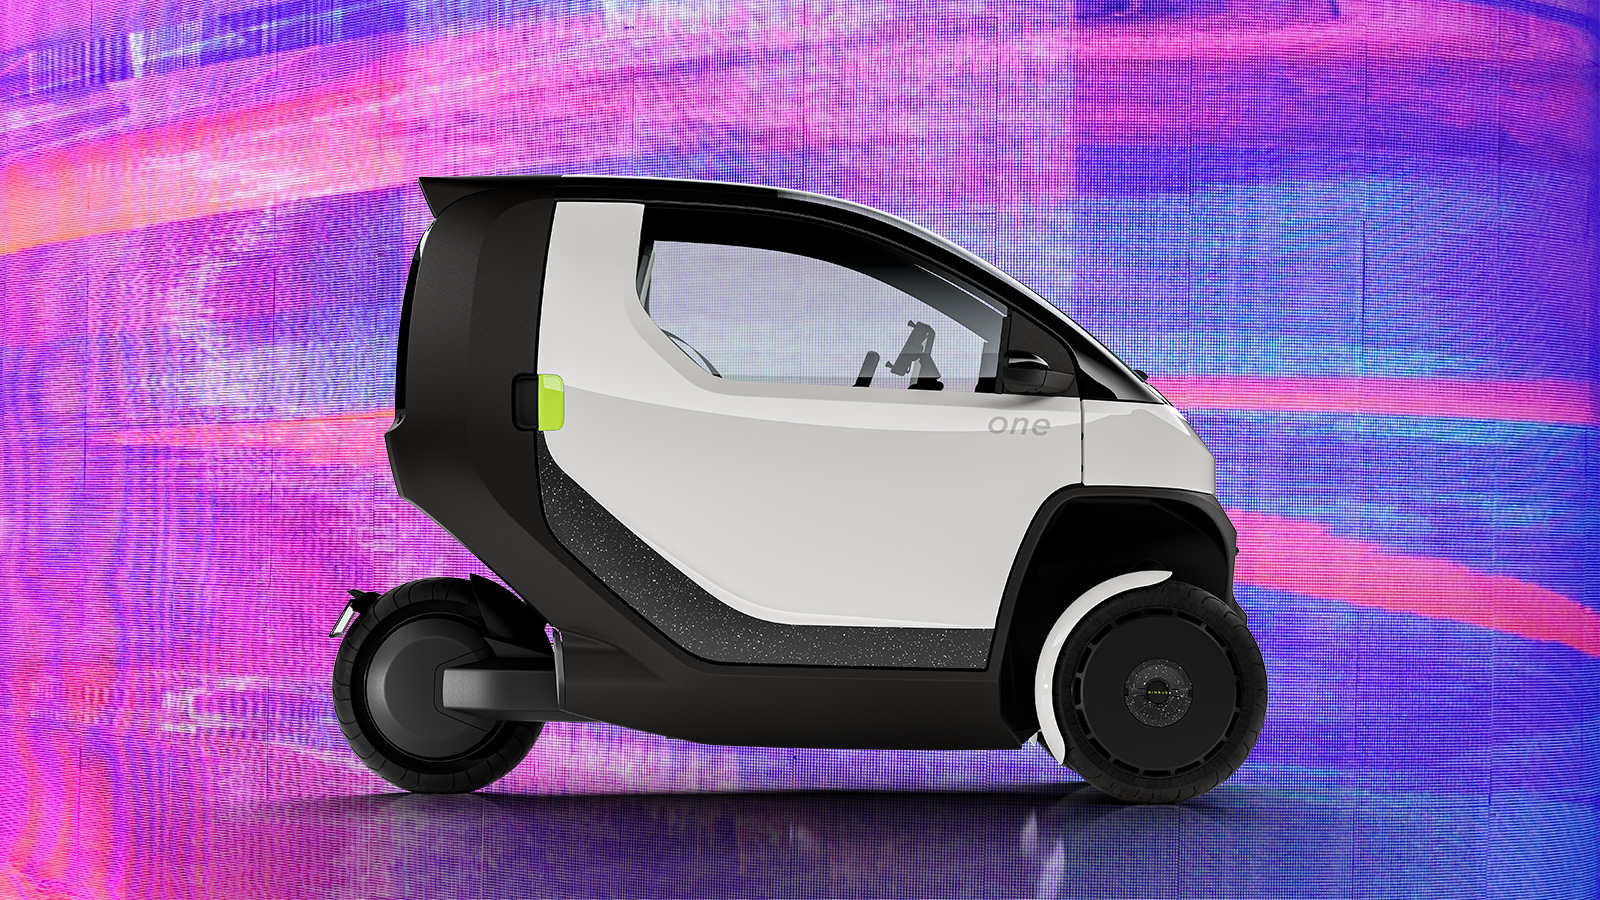 This compact electric vehicle wants to combine a scooter and a car